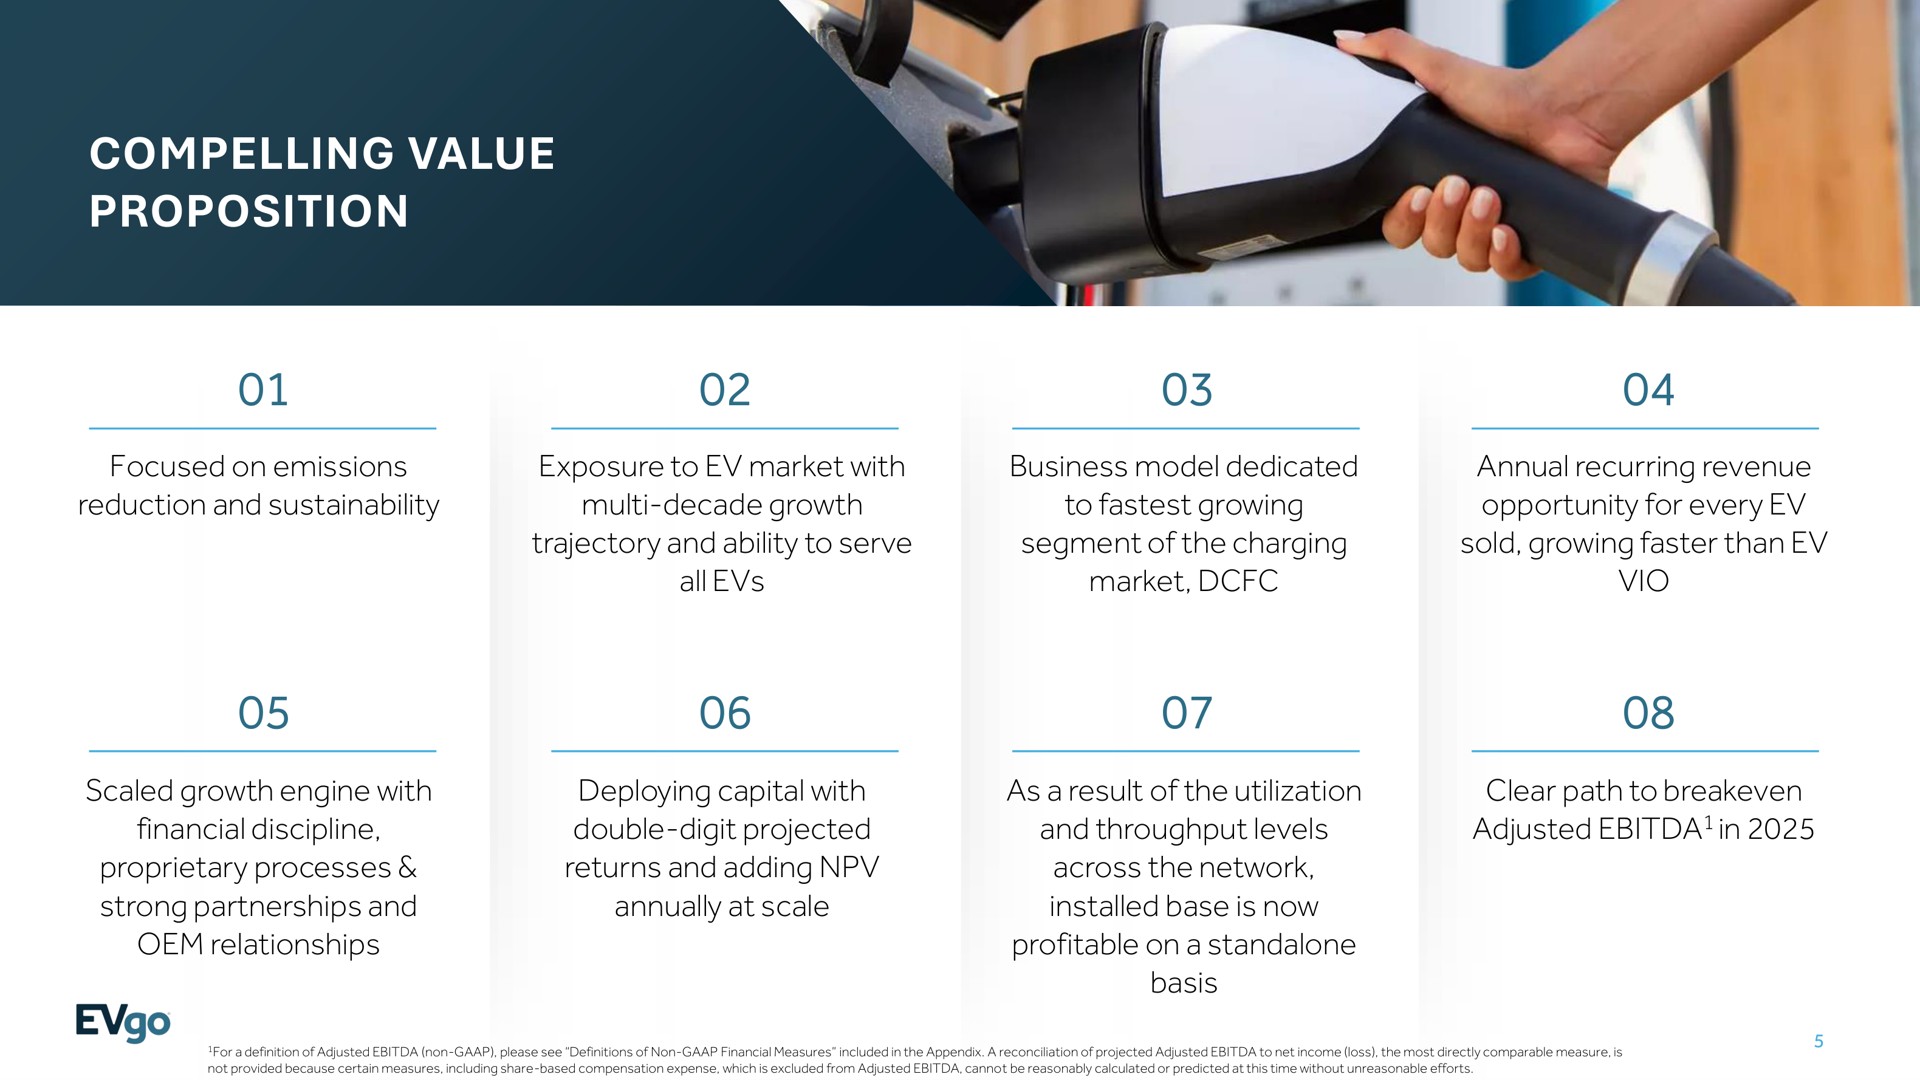 compelling value compelling value proposition proposition | EVgo